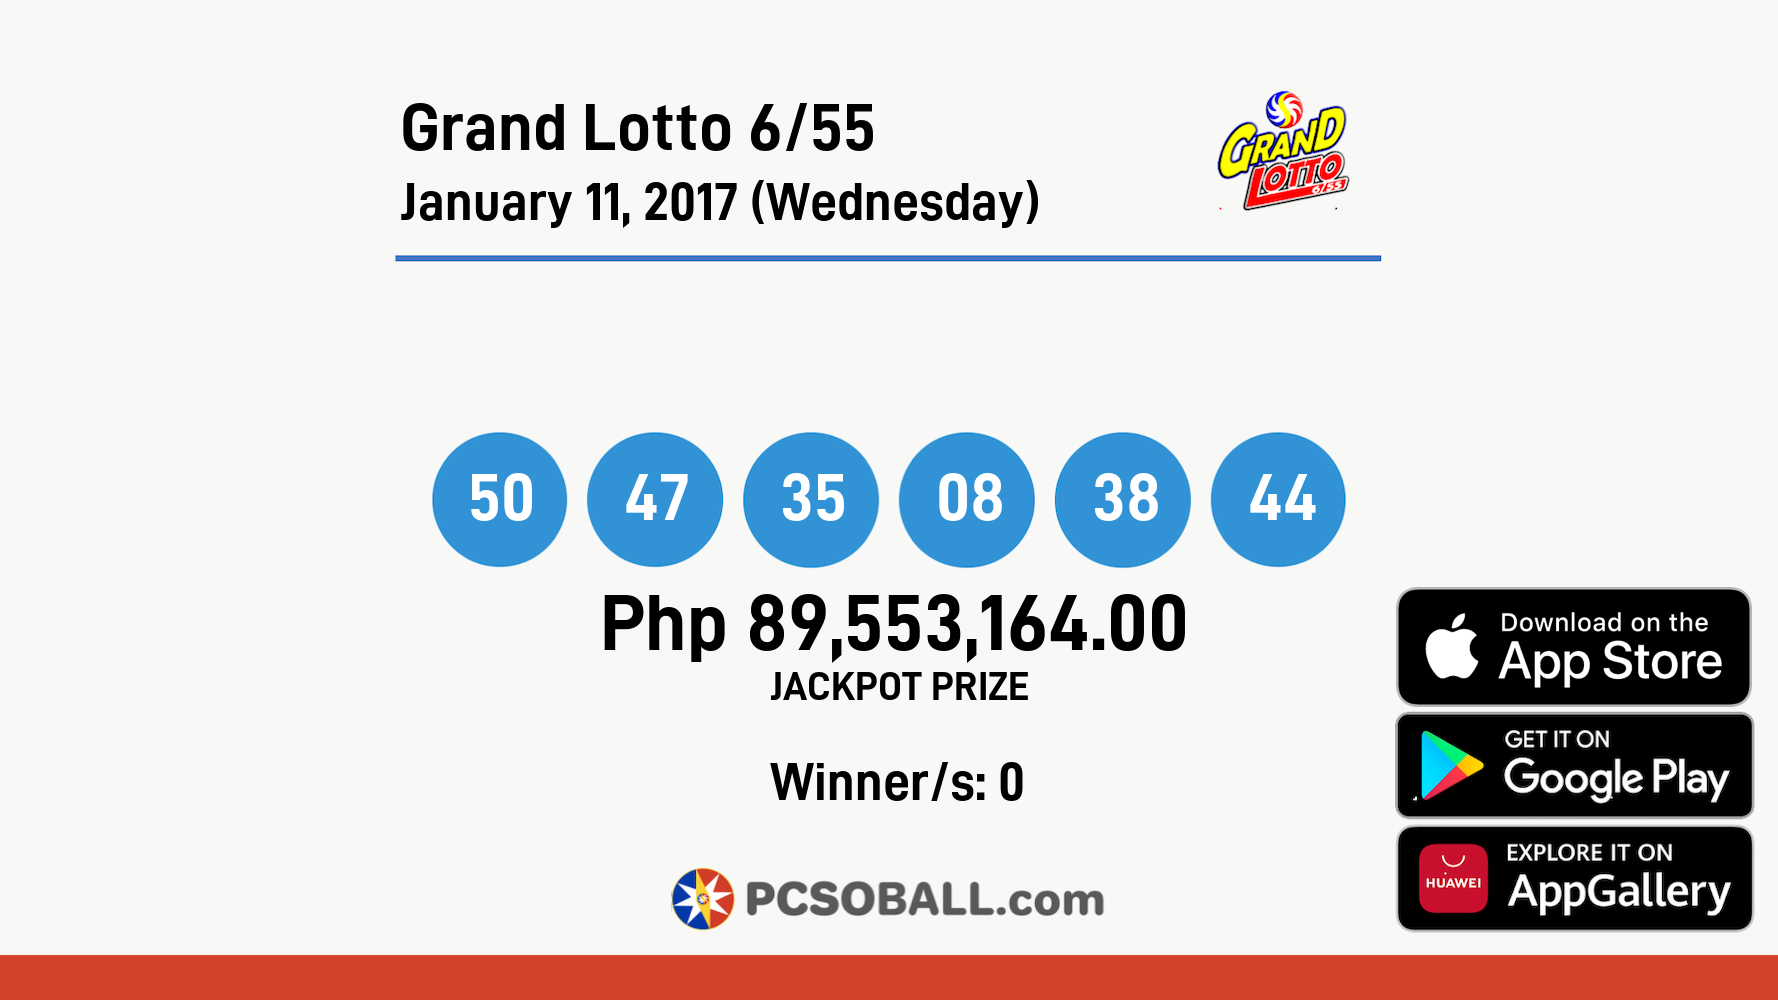 Grand Lotto 6/55 January 11, 2017 (Wednesday) Result